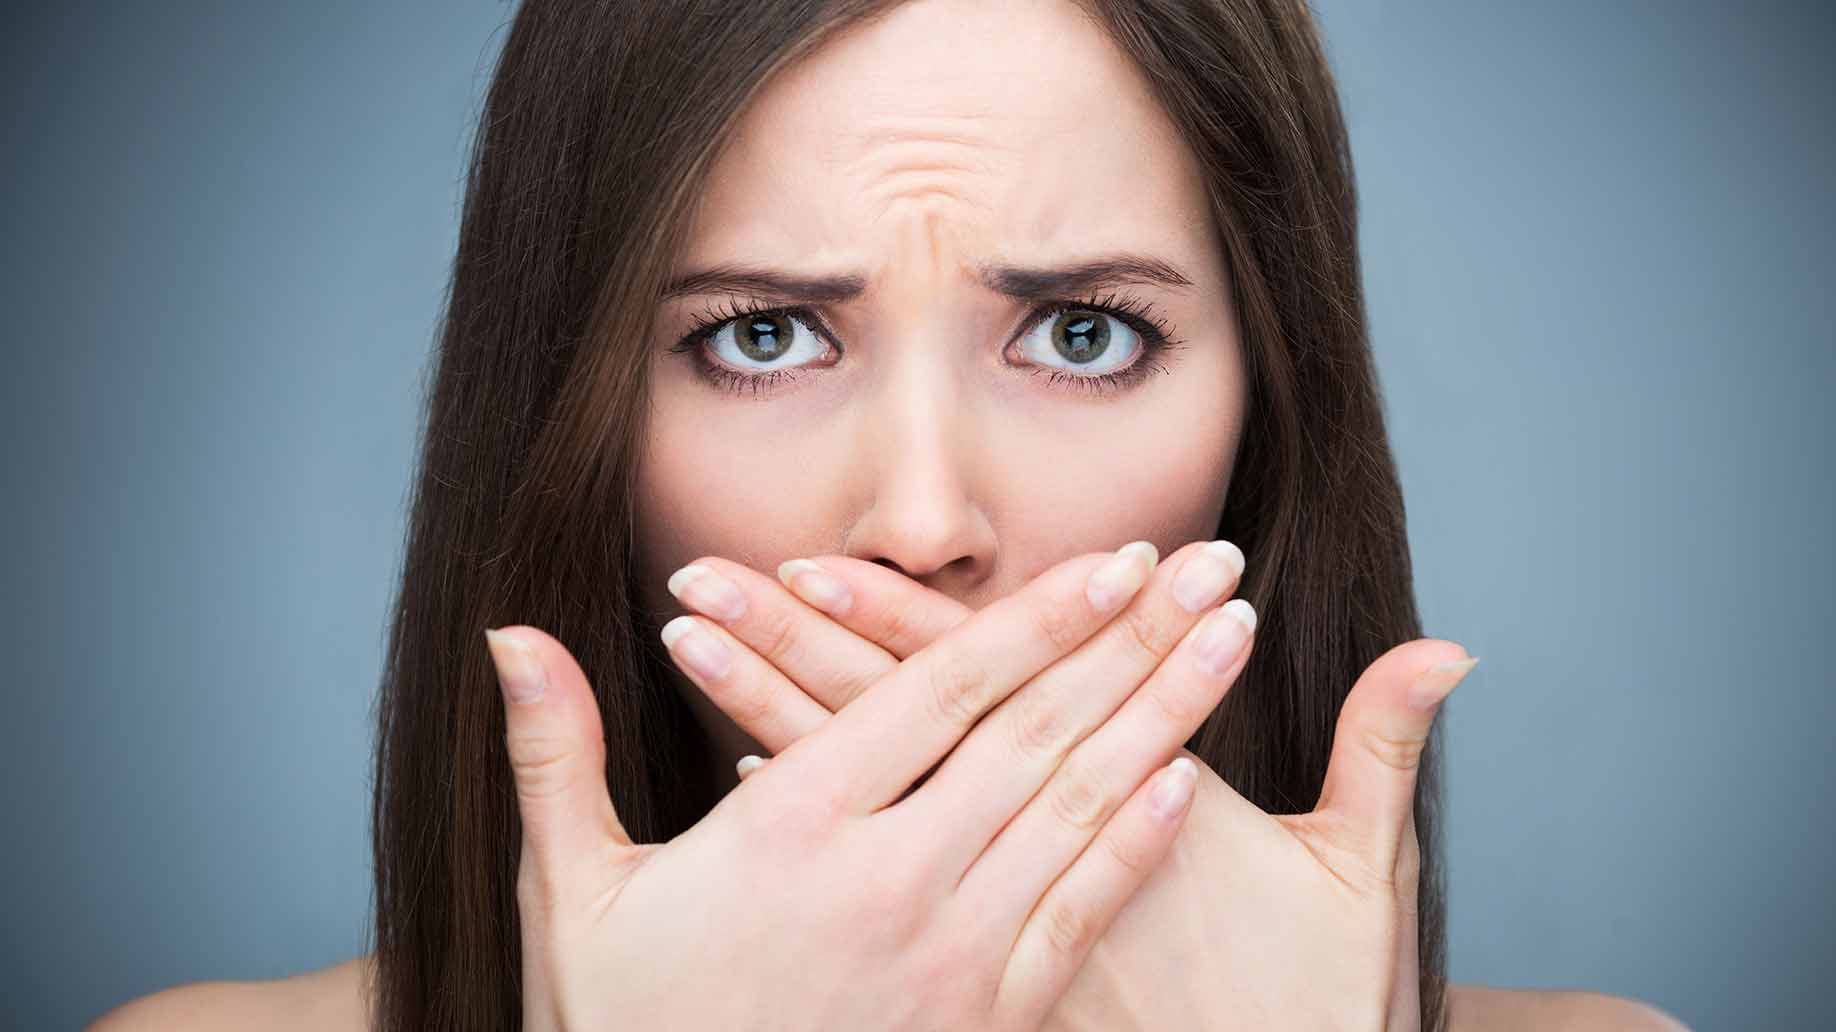 bad breath halitosis how to get rid of naturally remedies